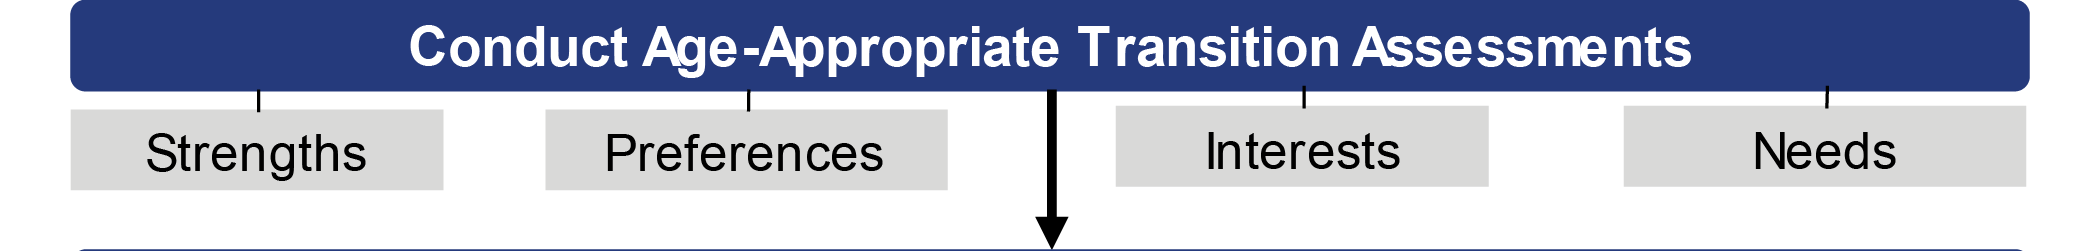 Conduct Appropriate Transition Assessments